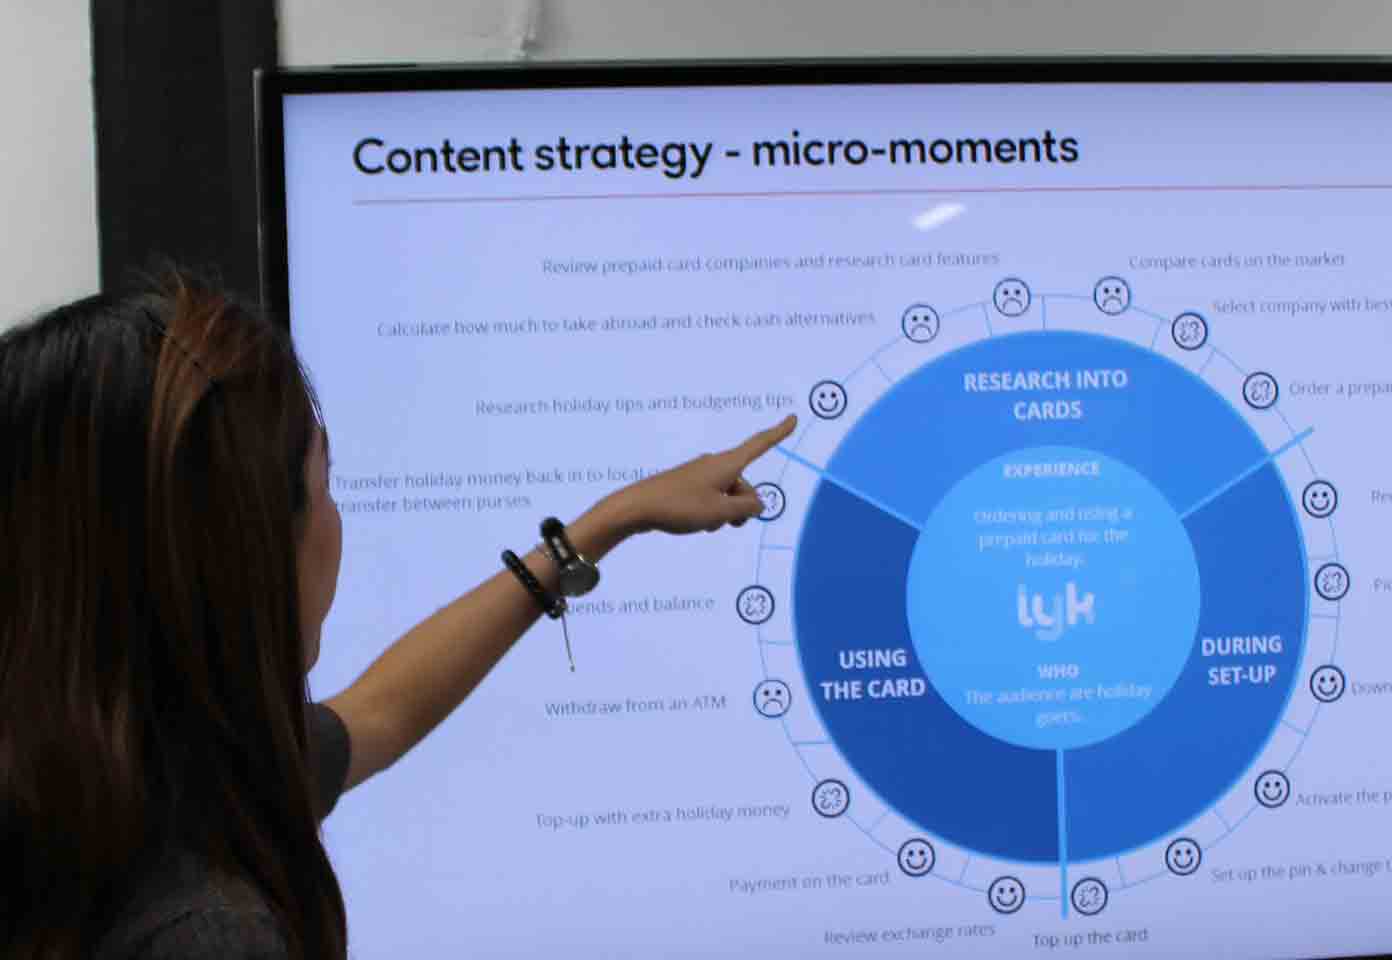 Using Cyber-Duck's Micro-Moments Wheel to plan the UX Content Strategy